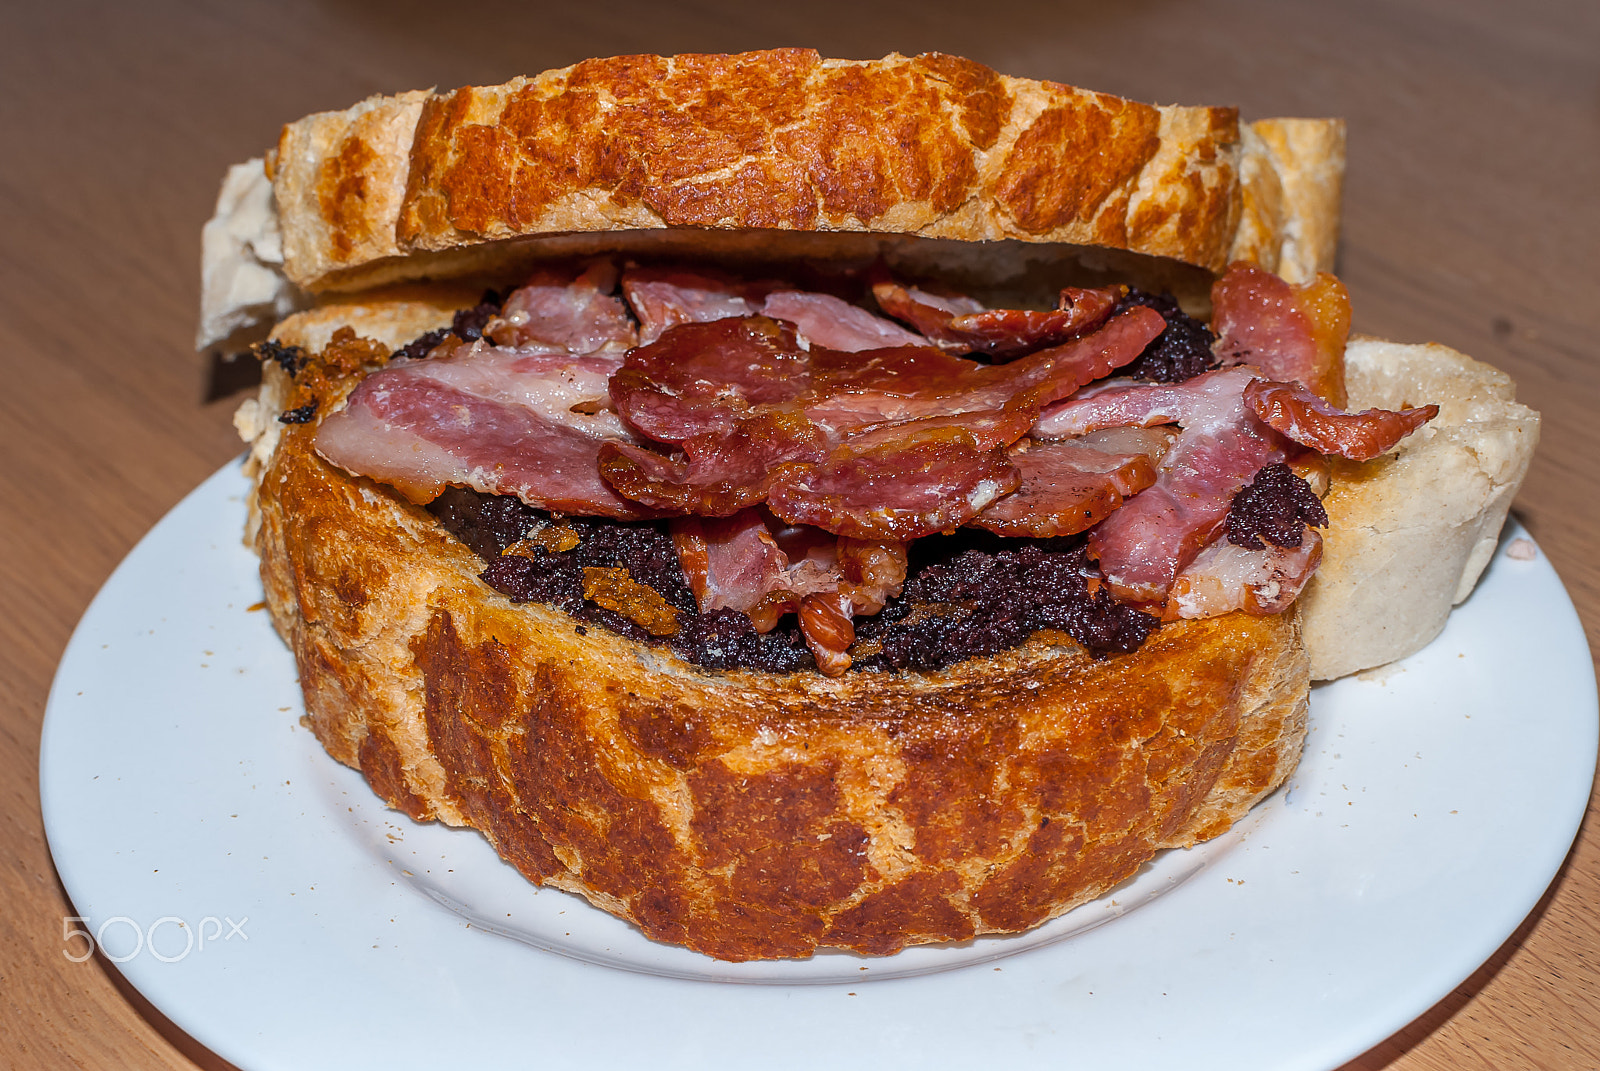 Nikon D200 sample photo. Toasted_bacon_and_black_pudding_sandwich.jpg photography